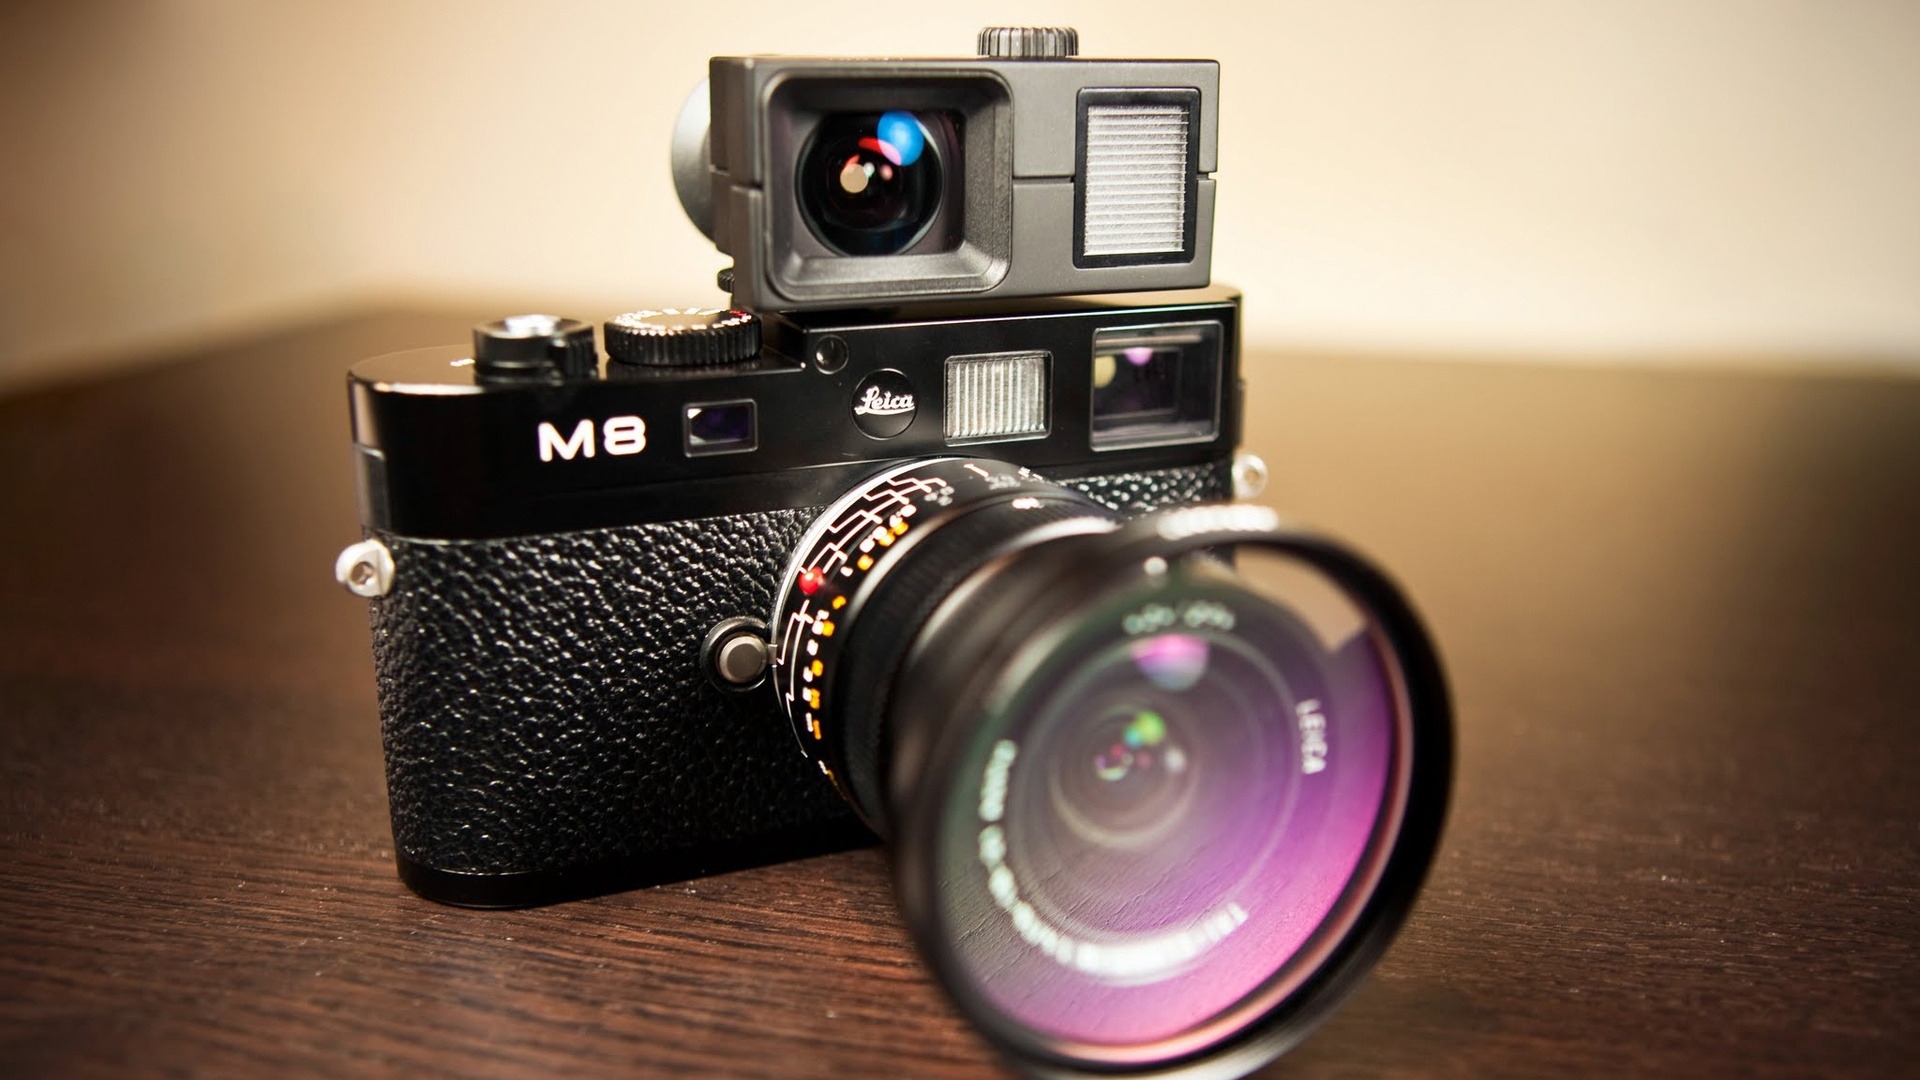 Leica M8 for 1920 x 1080 HDTV 1080p resolution